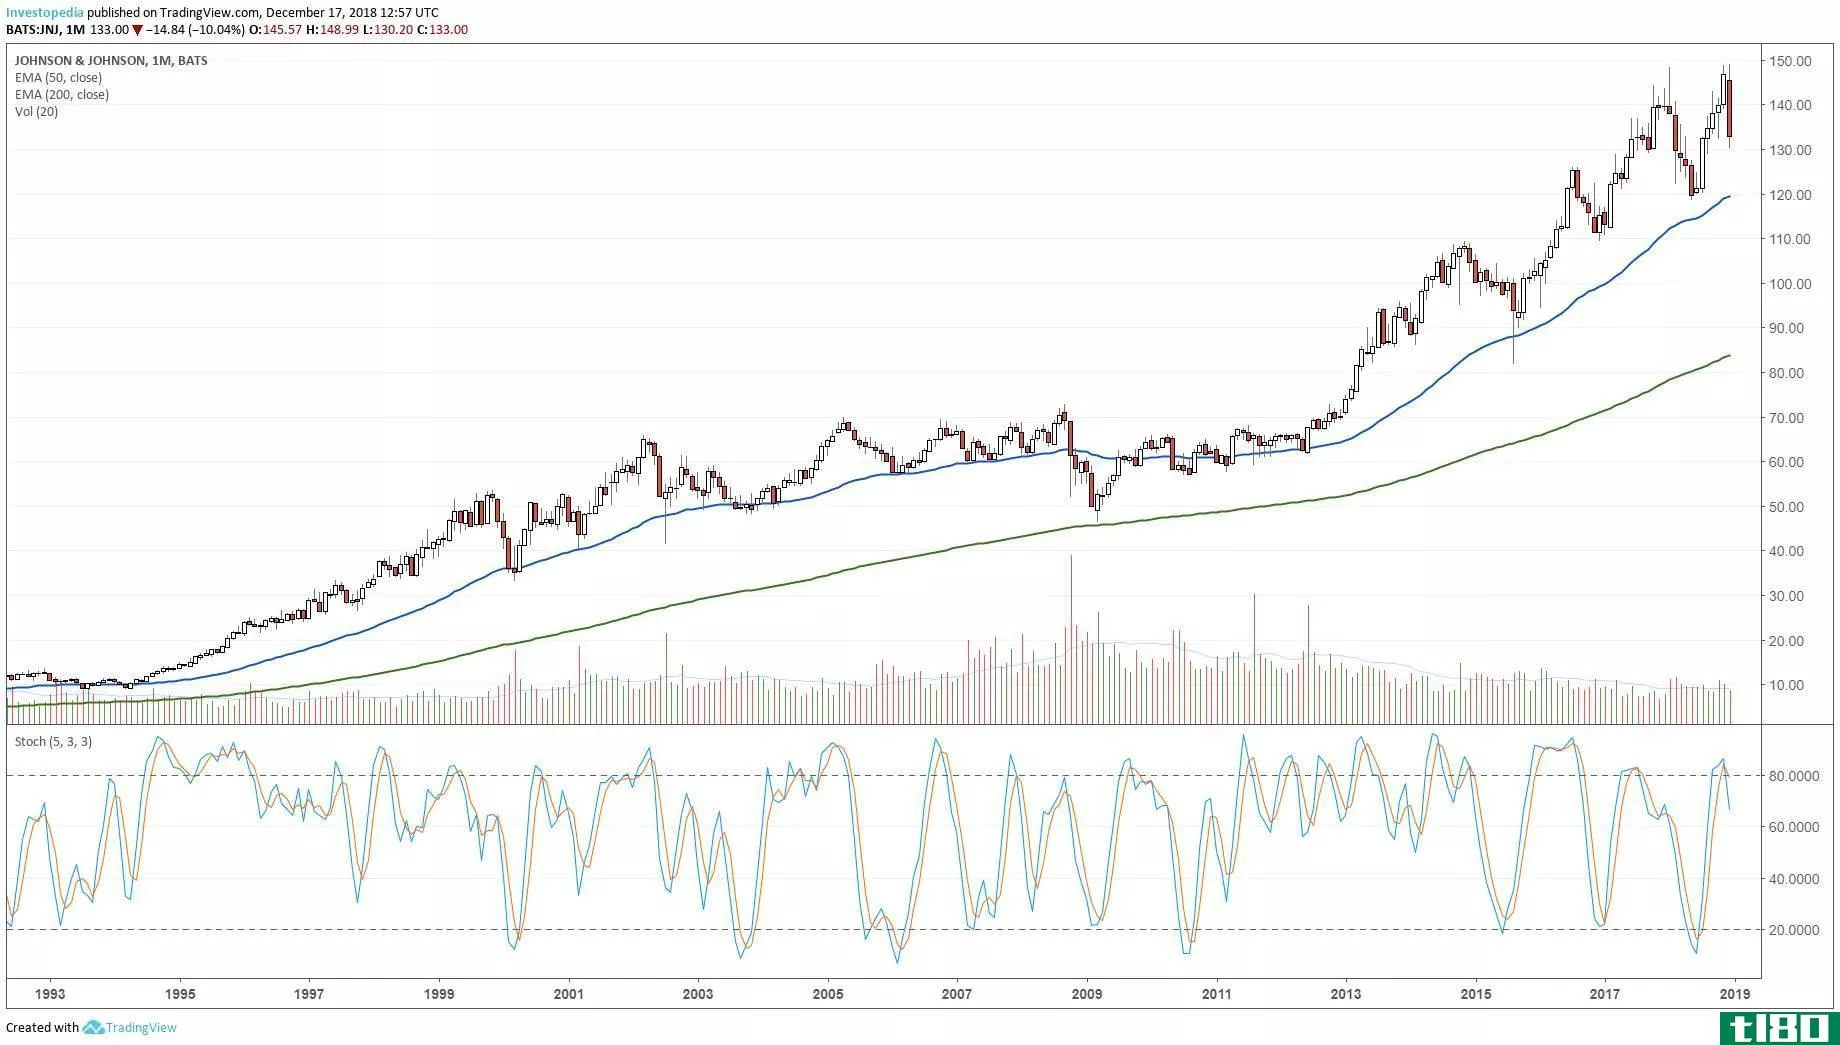 Long-term technical chart showing the performance of Johnson and Johnson (JNJ) stock